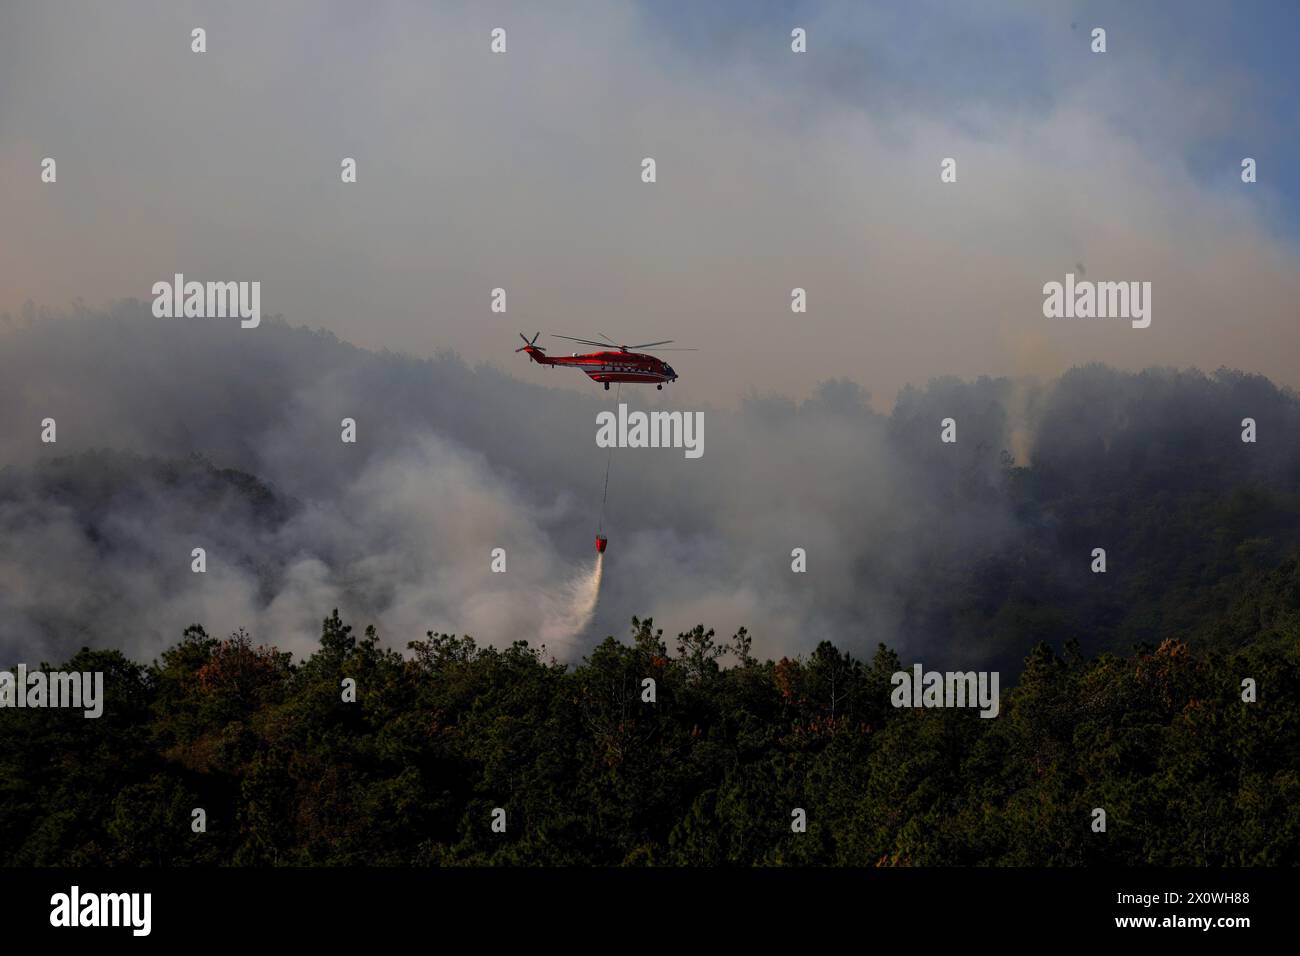 (240414) -- JINNING, April 14, 2024 (Xinhua) -- A fire-fighting helicopter operates at the site of a forest fire in Jinning District of Kunming, southwest China's Yunnan Province, April 14, 2024. More than 2,300 people are battling a forest fire that has raged in southwest China's Yunnan Province since Friday, local authorities said Sunday. The fire started at around 4 p.m. Friday in Diantou Village in Jinning District of the capital city Kunming. No casualties have been reported so far. Officials confirmed the mobilization of 46 excavators and two helicopters to help put out the blaze. ( Stock Photo